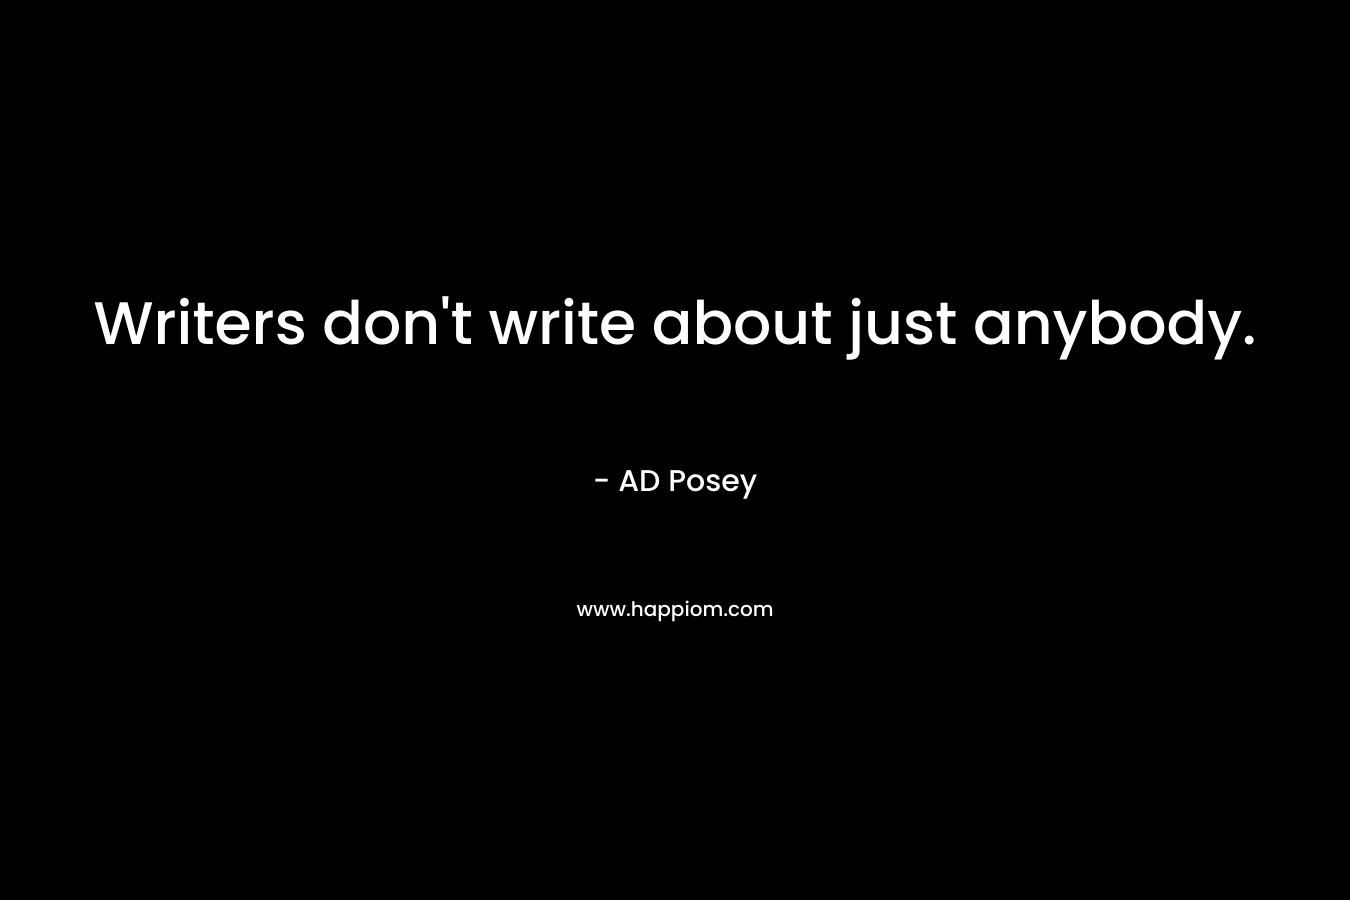 Writers don't write about just anybody.